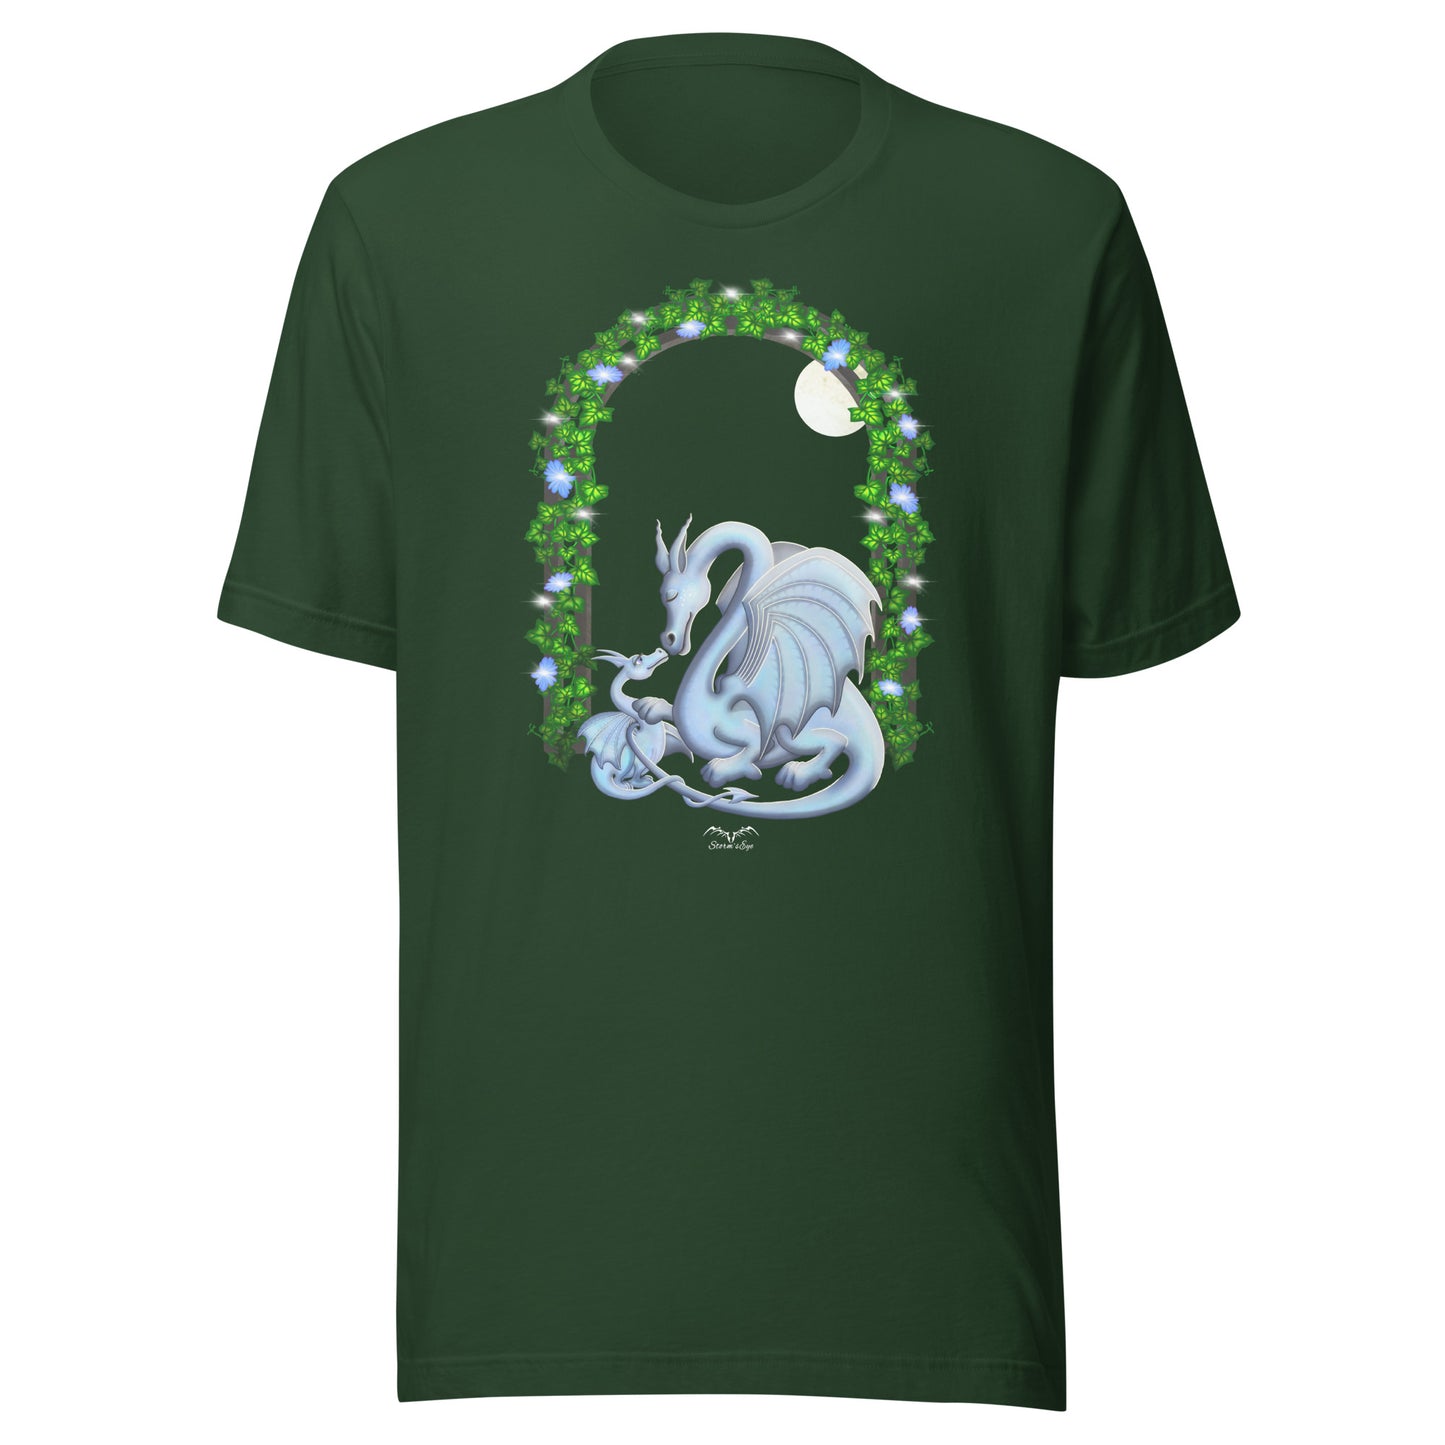 Mum and baby dragon T-shirt, bottle green, by Stormseye Design